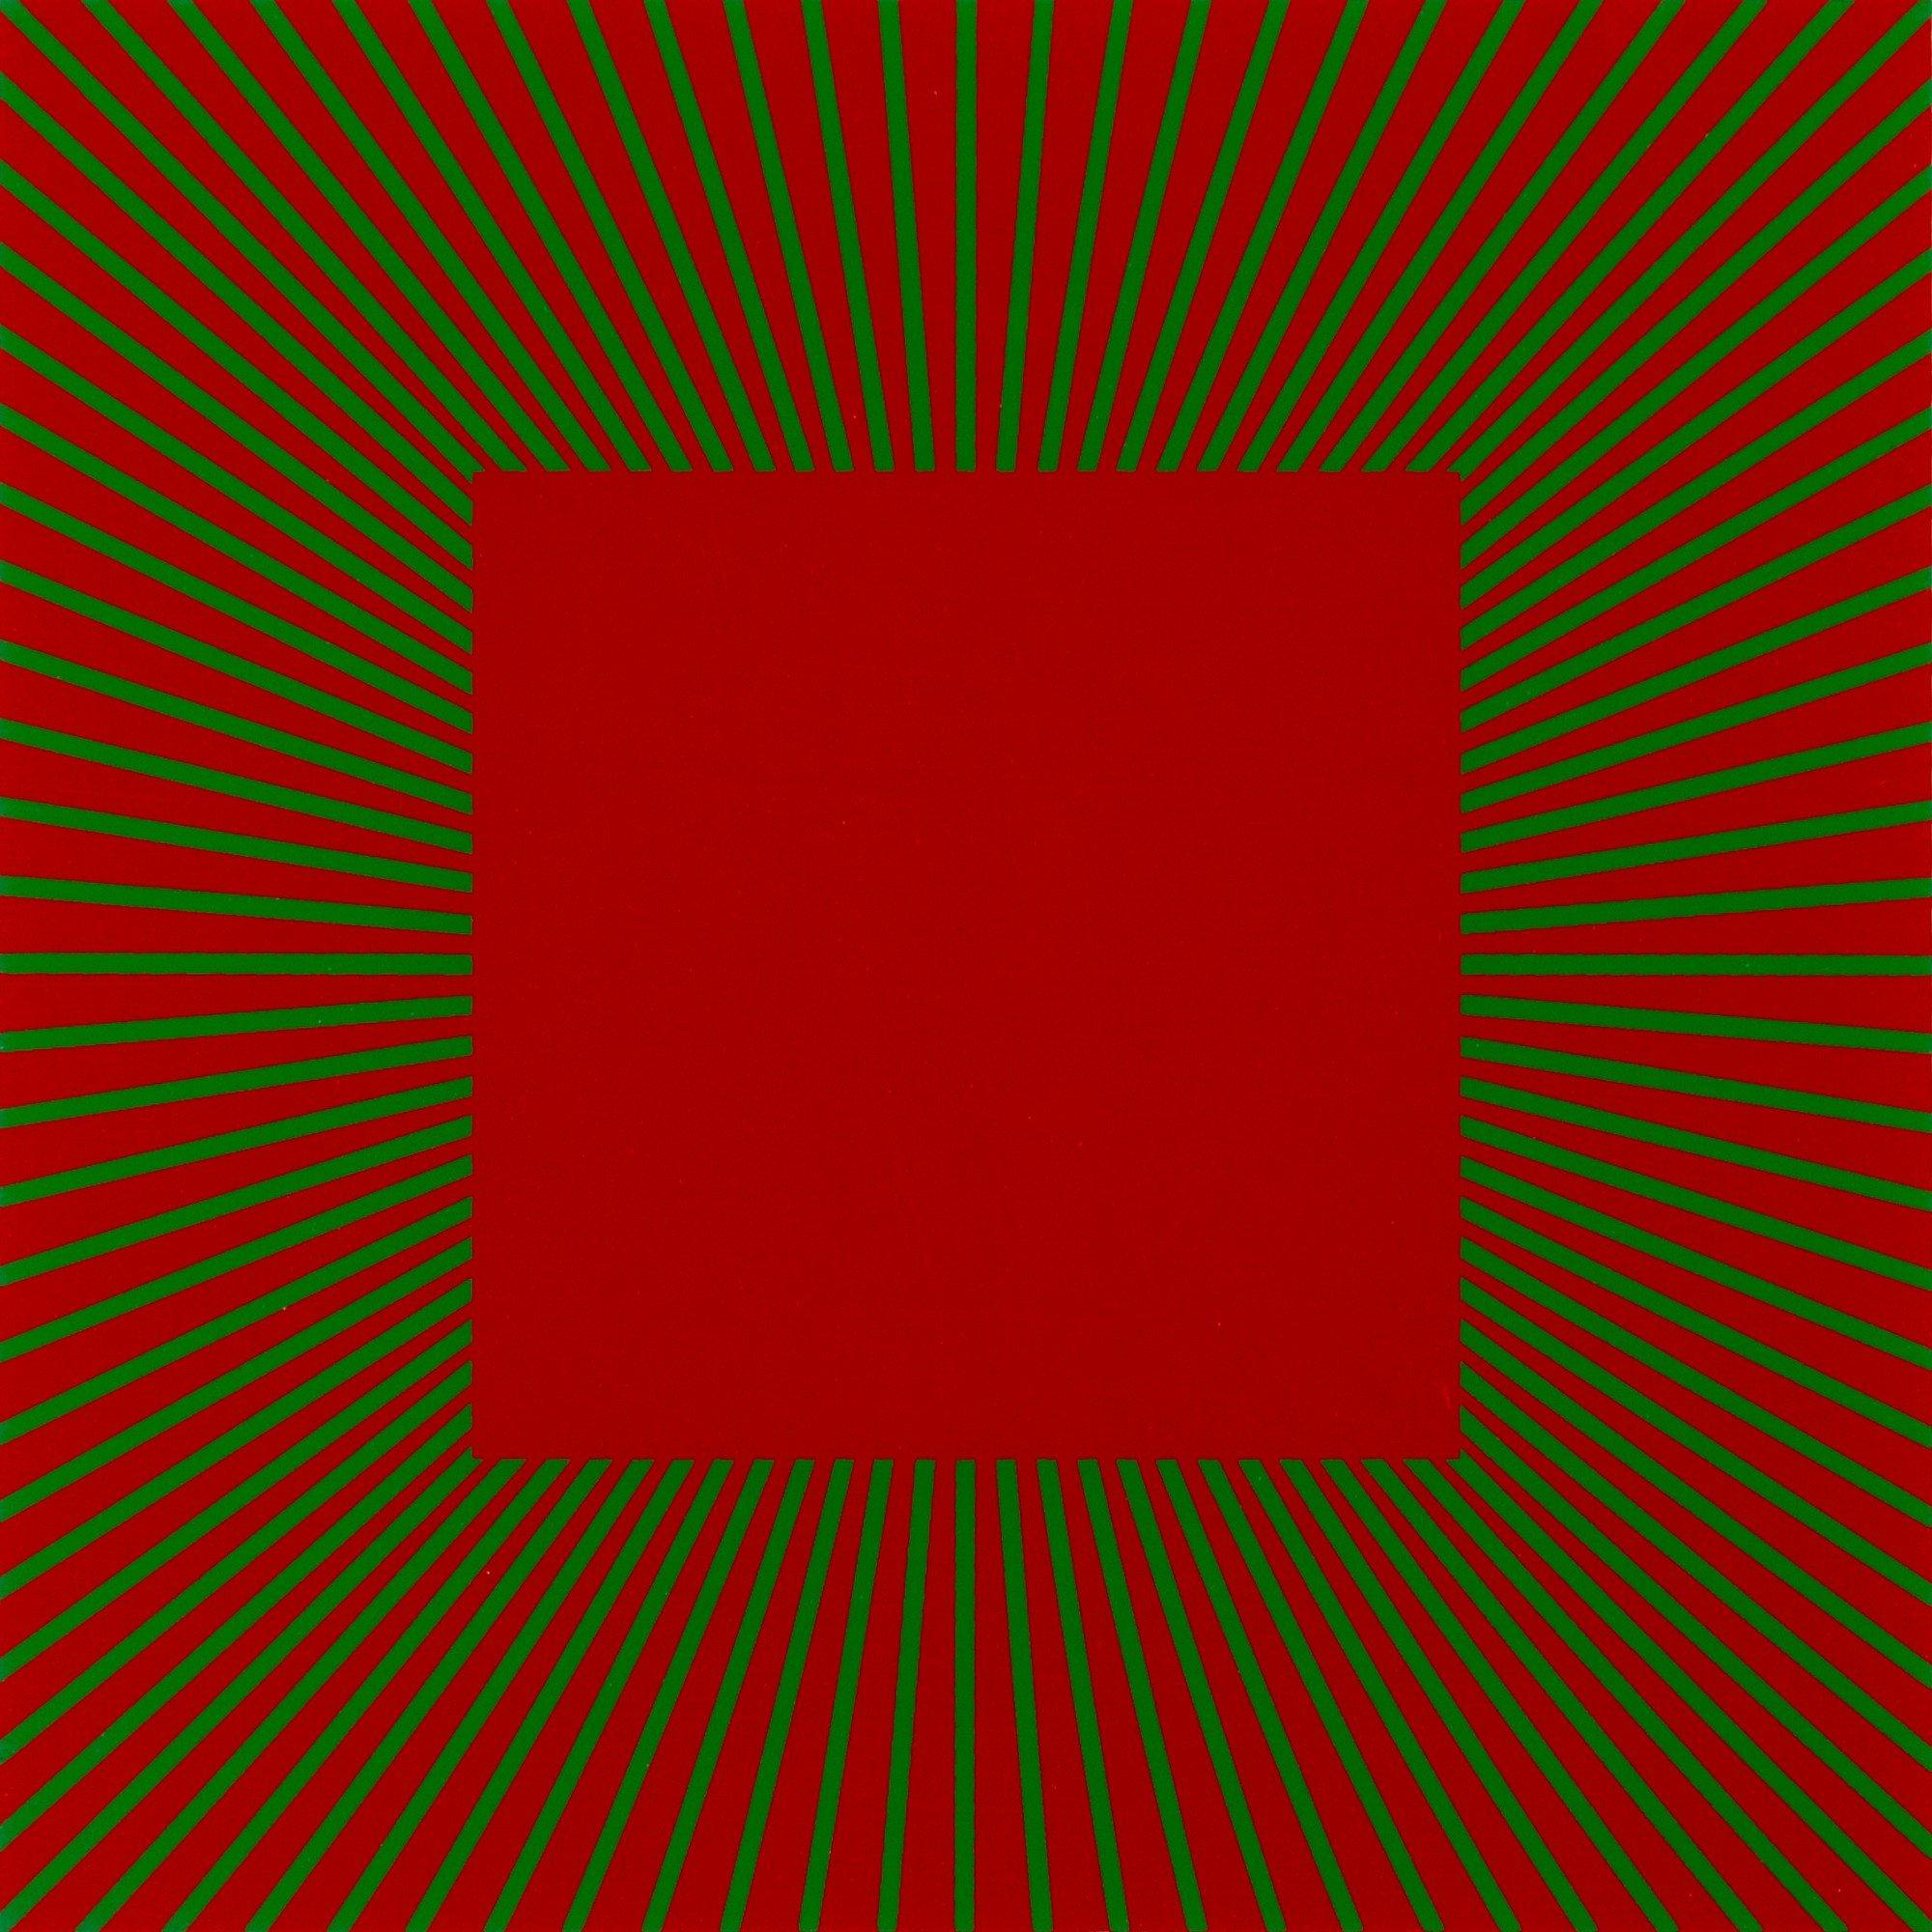 Richard Anuszkiewicz (American, 1930-2020)
Red with Green, 1990
Silkscreen on paper
Signed and dated lower right, numbered 8/20 lower left
13.75 x 14.25 inches
23.75 x 24 inches, framed

Richard Anuszkiewicz was born in Erie, Pennsylvania to Polish